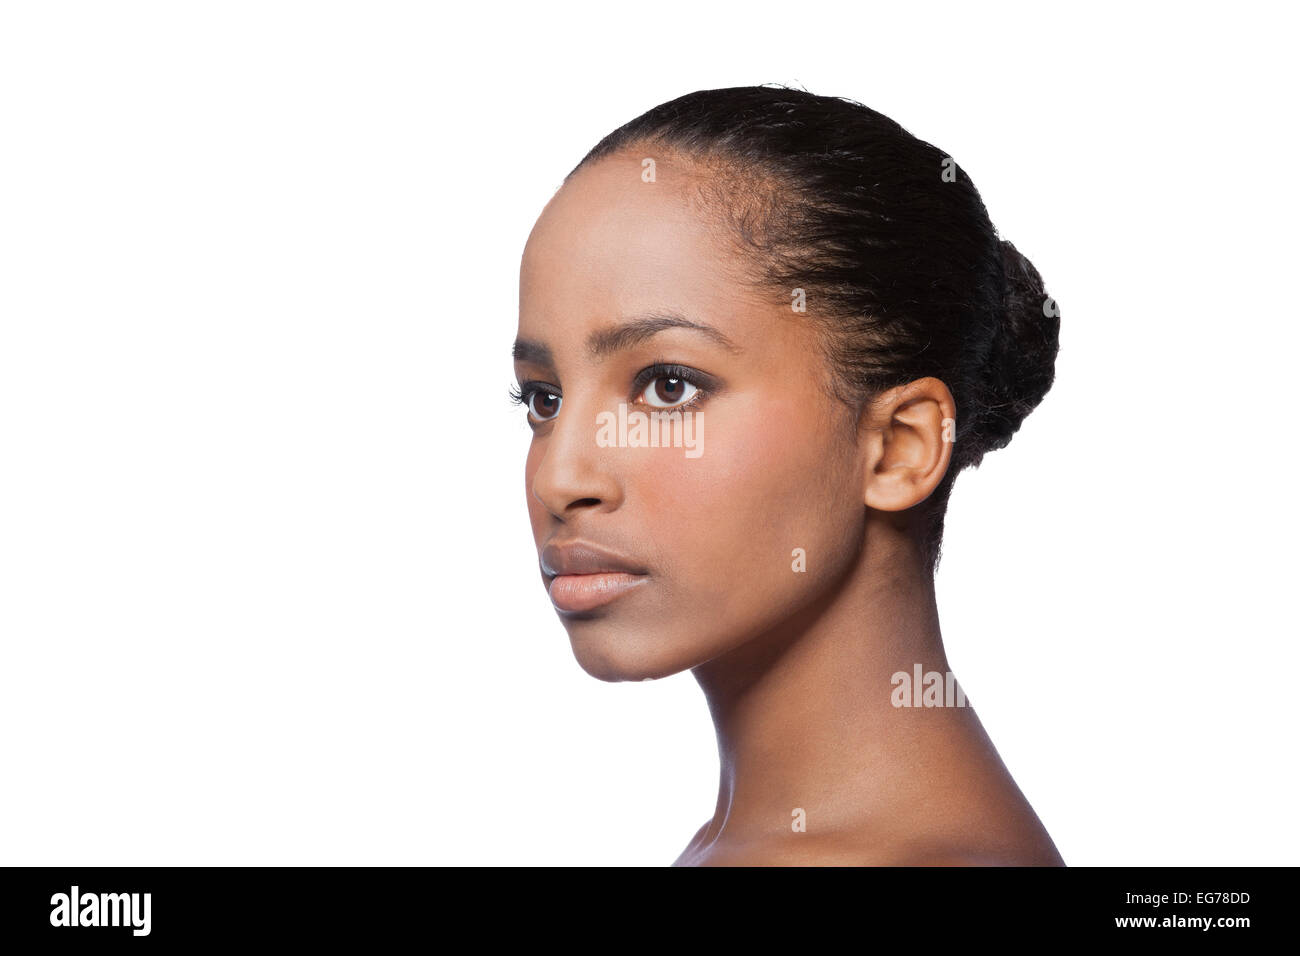 Portrait of serious looking young woman in front of white background Stock Photo